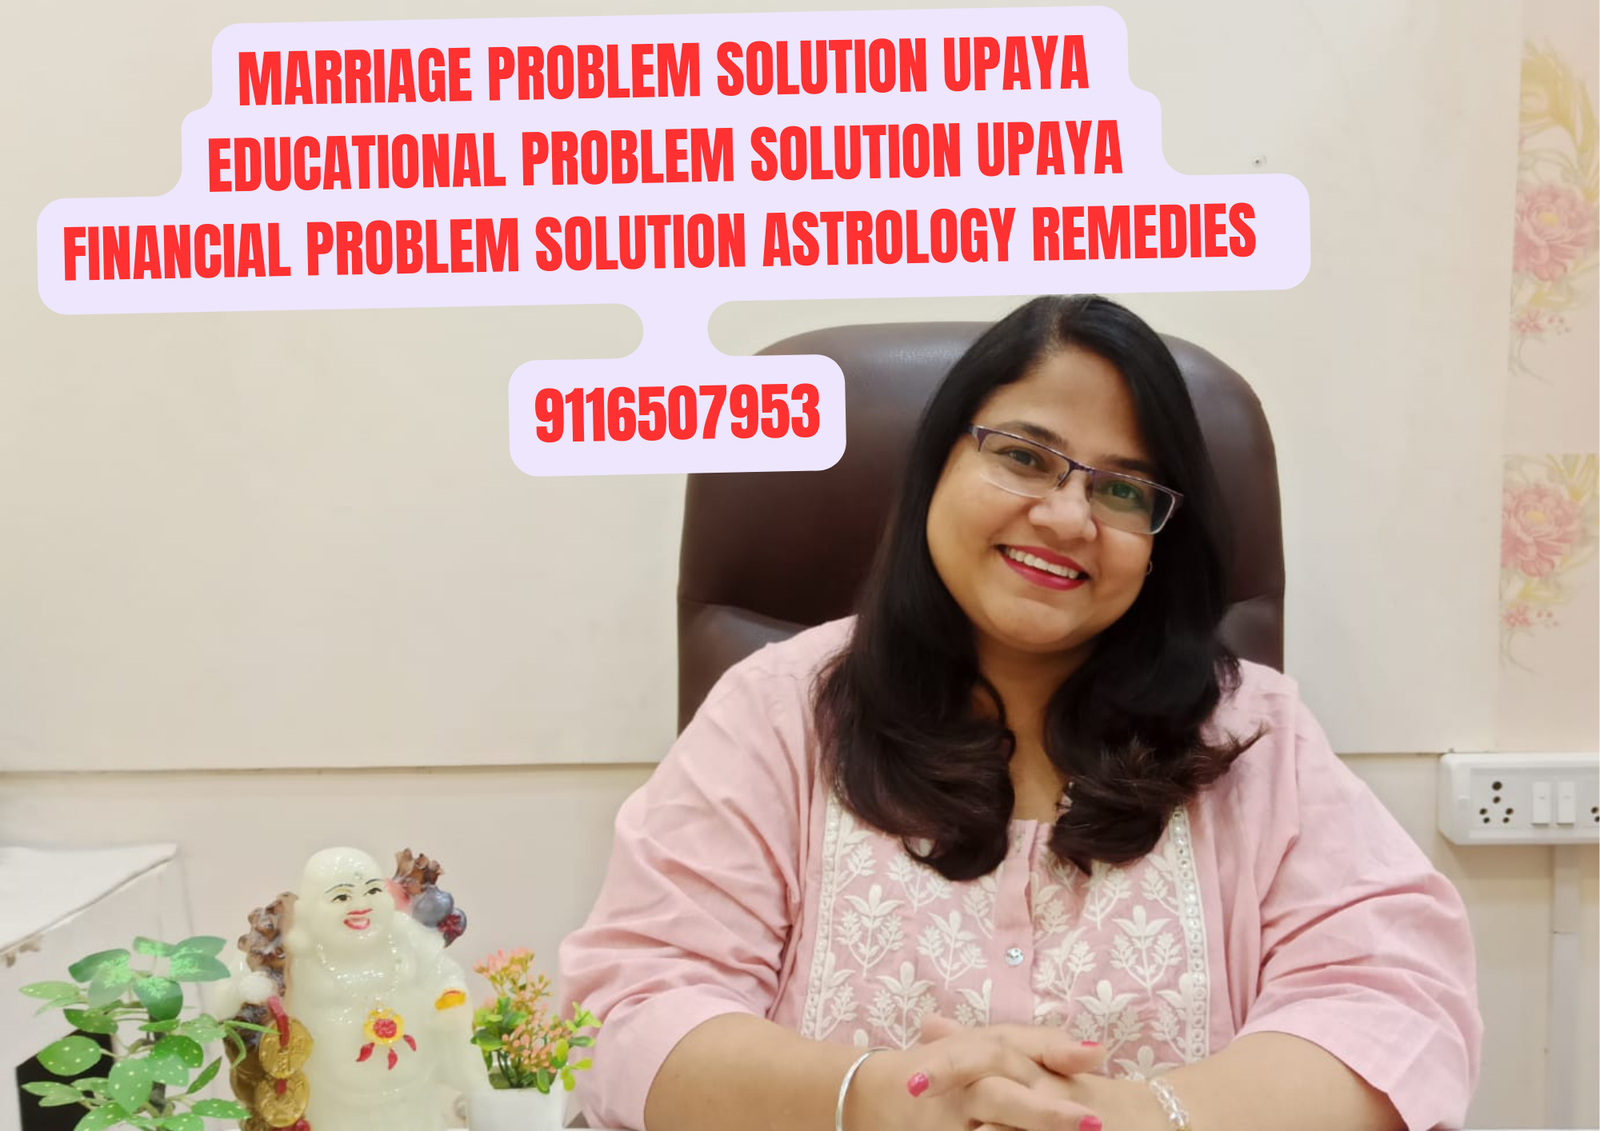 Marriage Problem Solution Upaya Educational Problem Solution Upaya Astrologer Financial Problem Solution Astrology Remedies